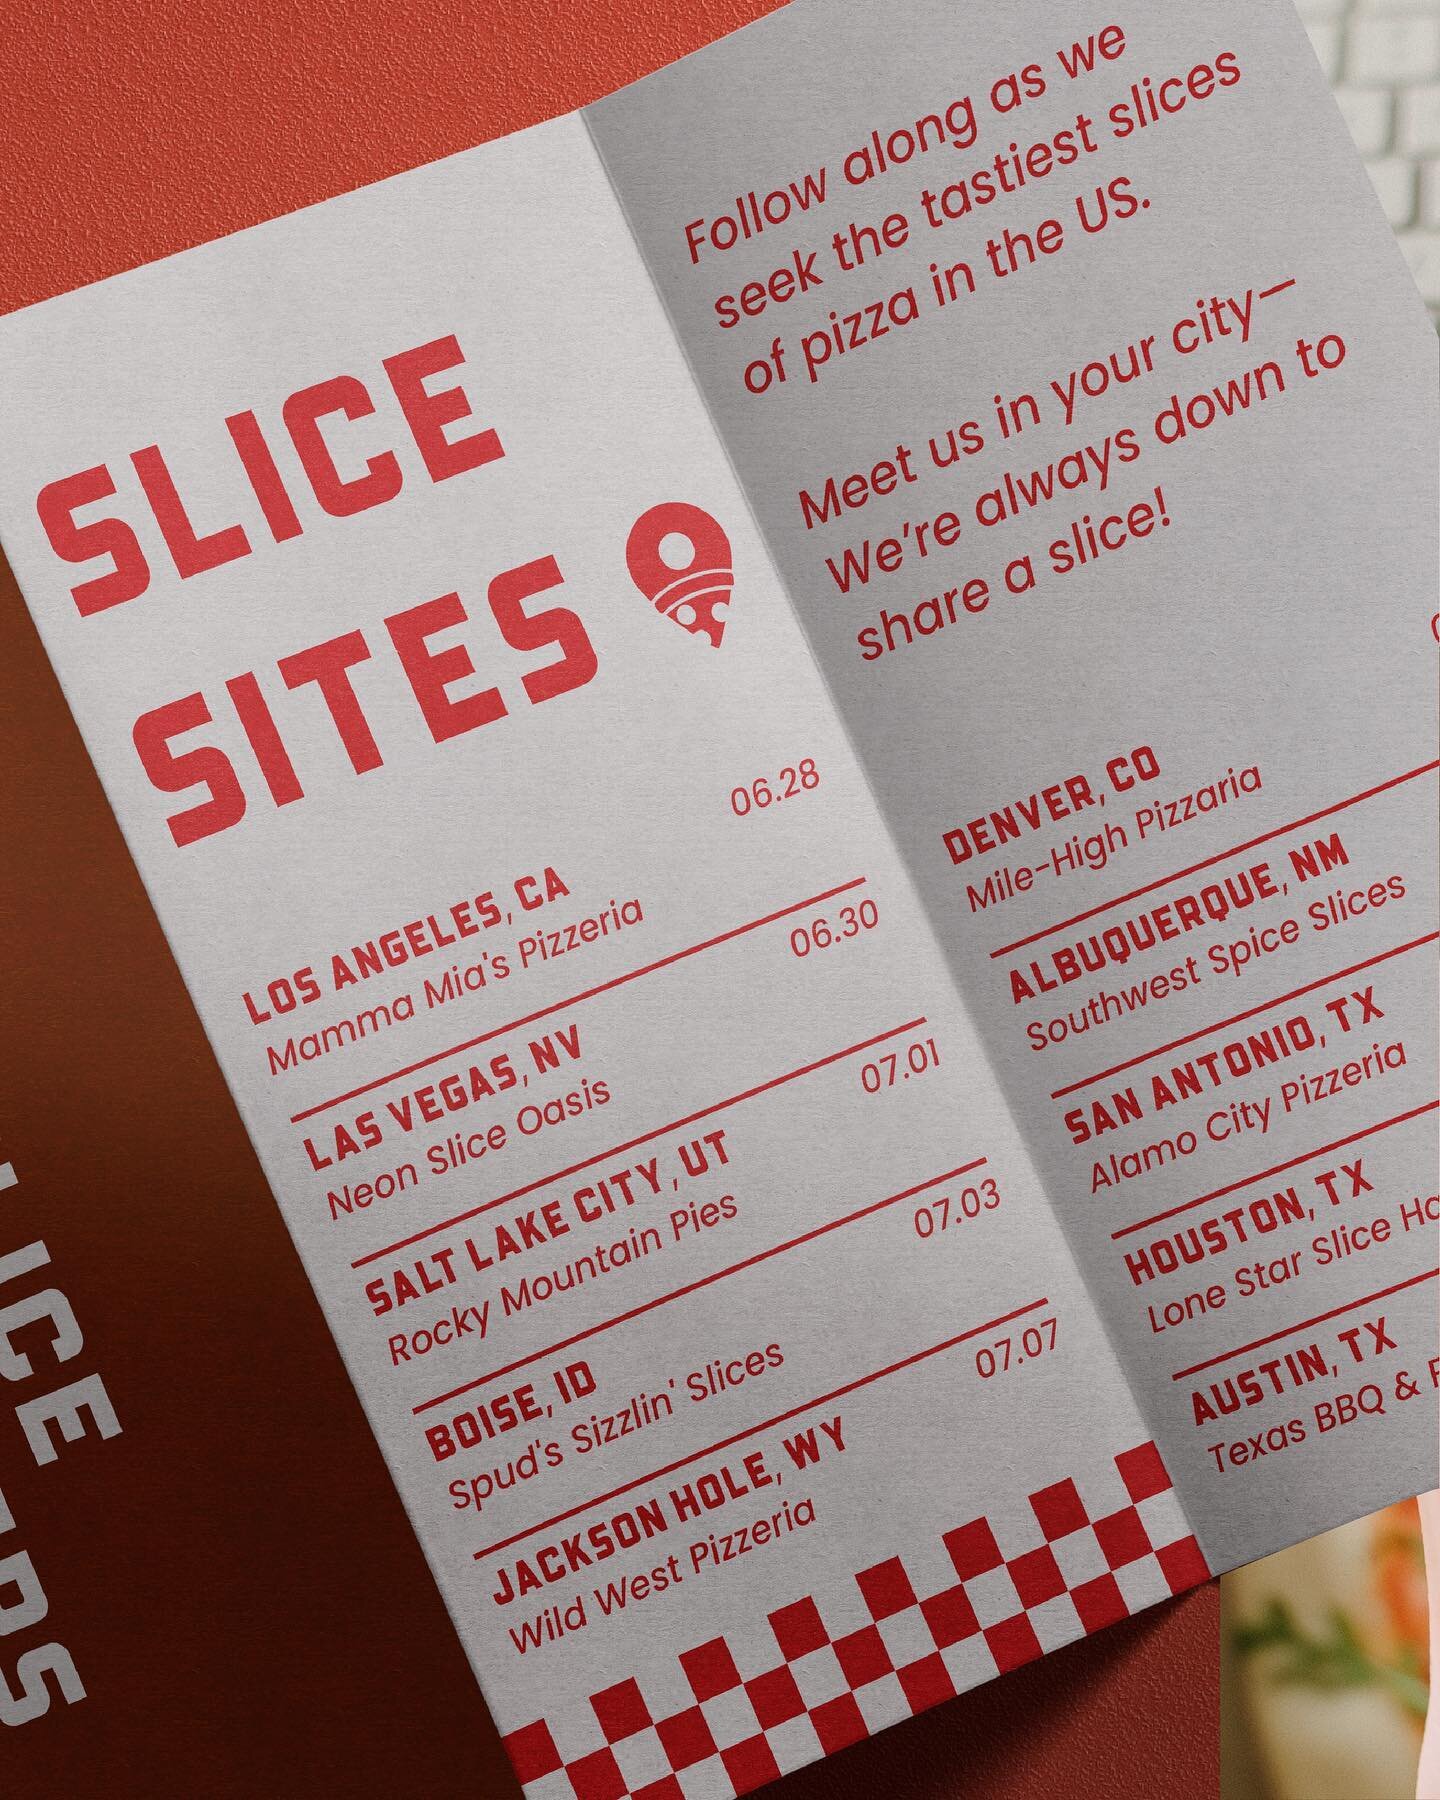 🍕 How do you connect with your audience? Do they know what to expect and have ways to interact directly with you? 

For Slice Seekers, I've created a menu style itinerary so that their followers can come out and grab a slice together when the trip c